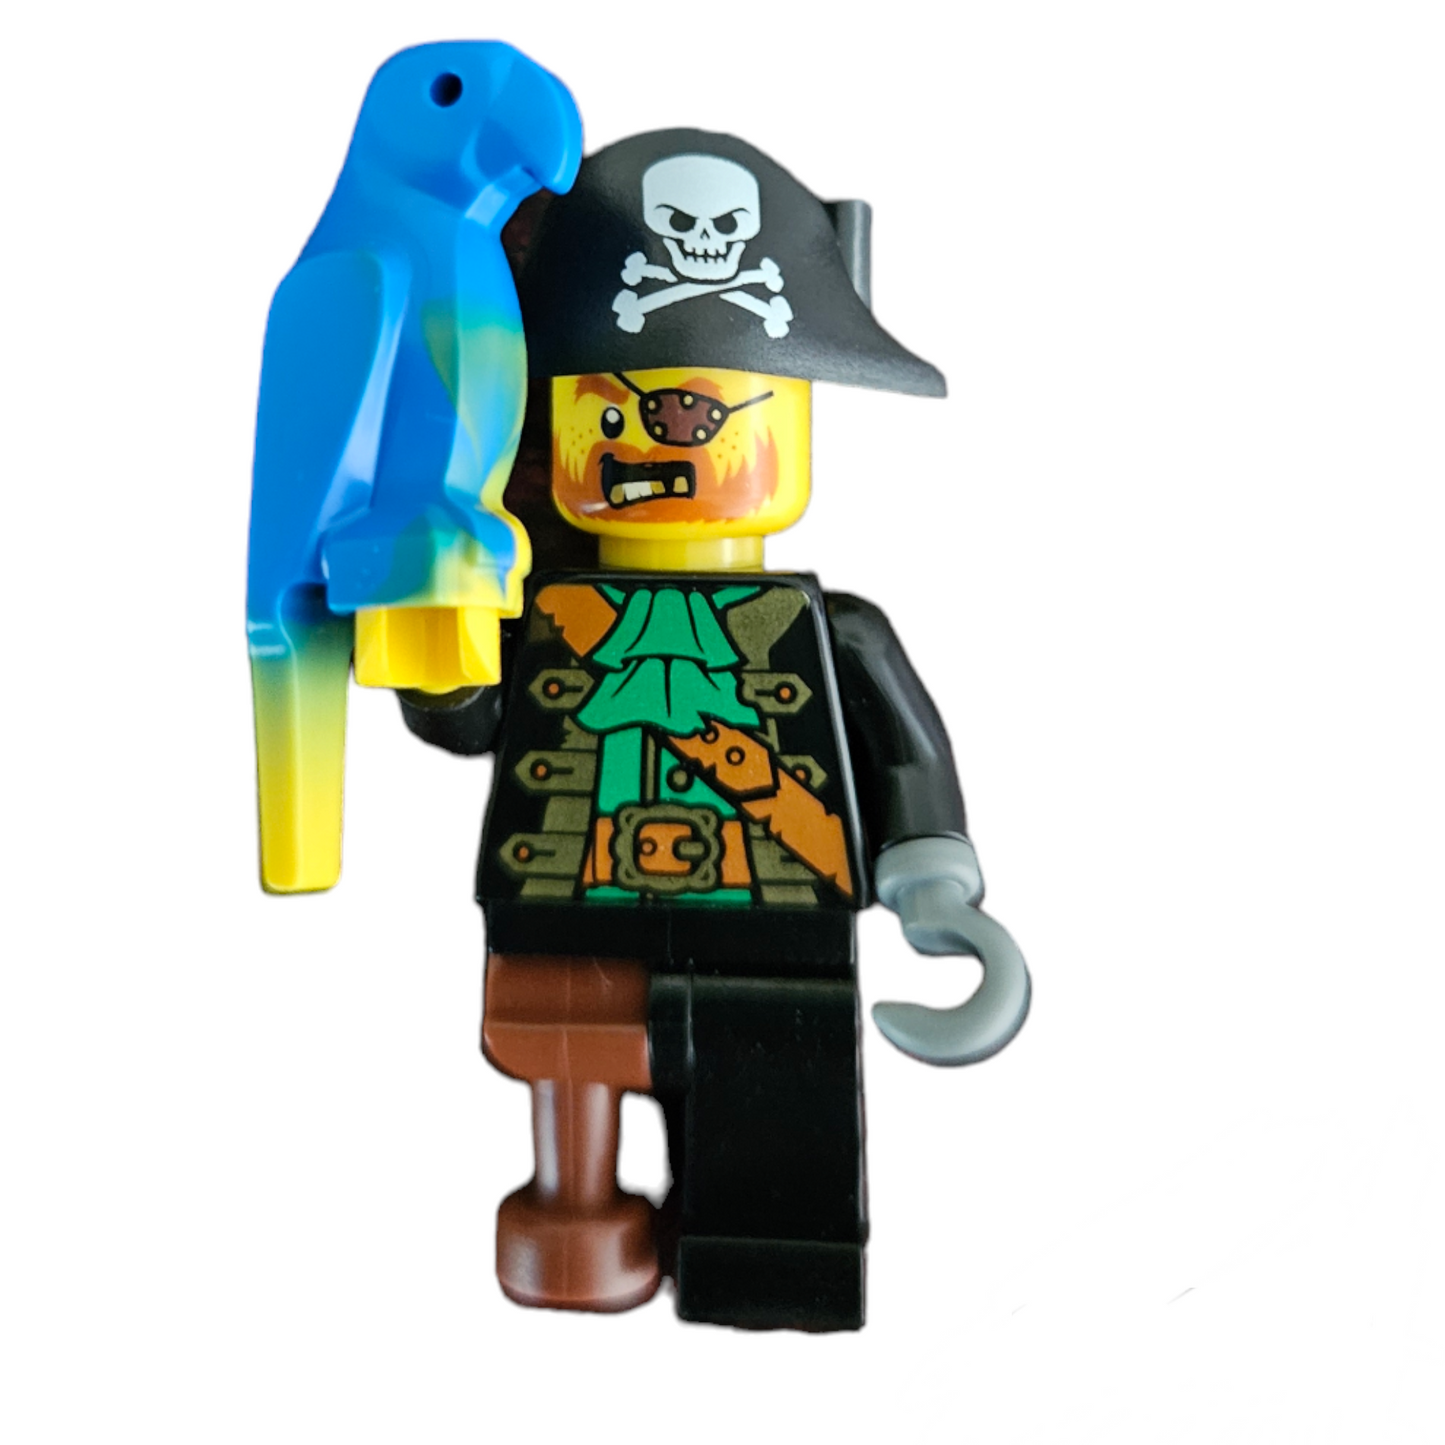 Pirate Captain one leg and hook hand with Parrot Lego minifigure – BricZco